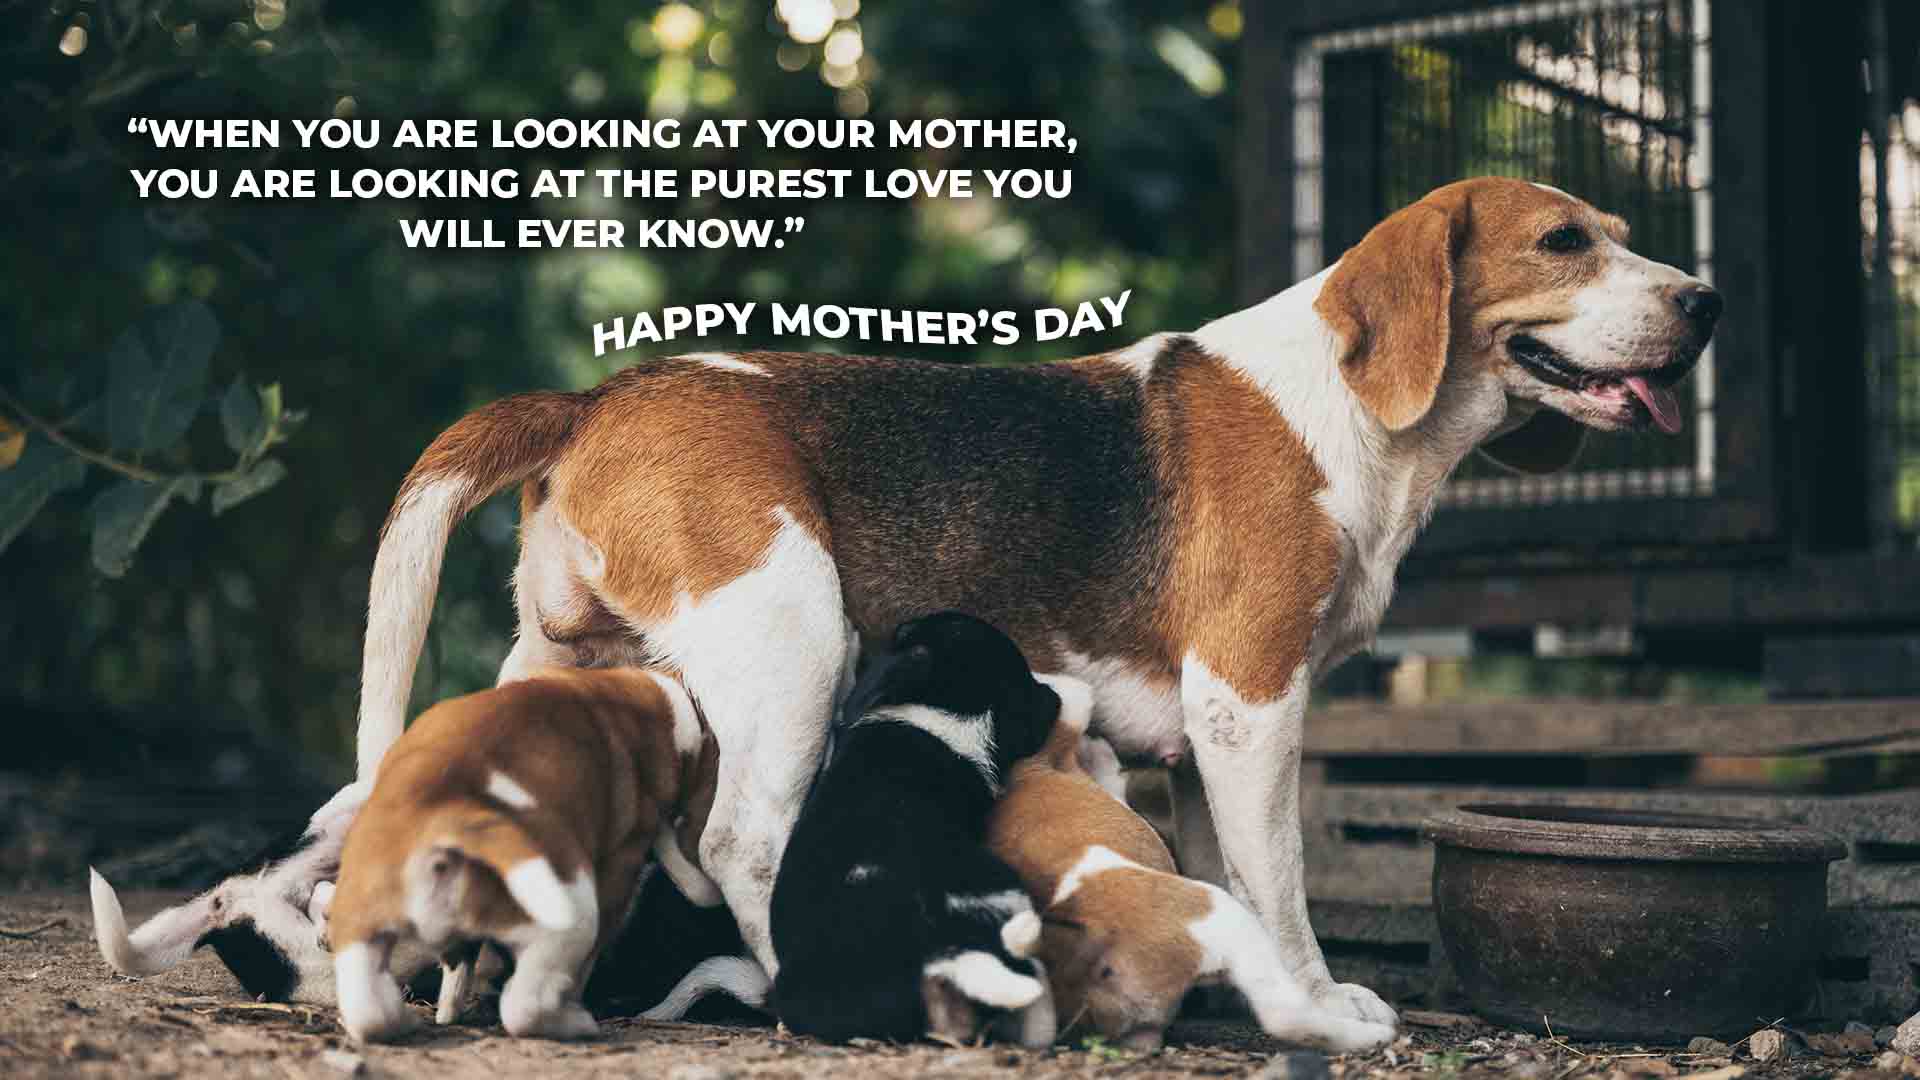 “When you are looking at your mother, you are looking at the purest love you will ever know.”